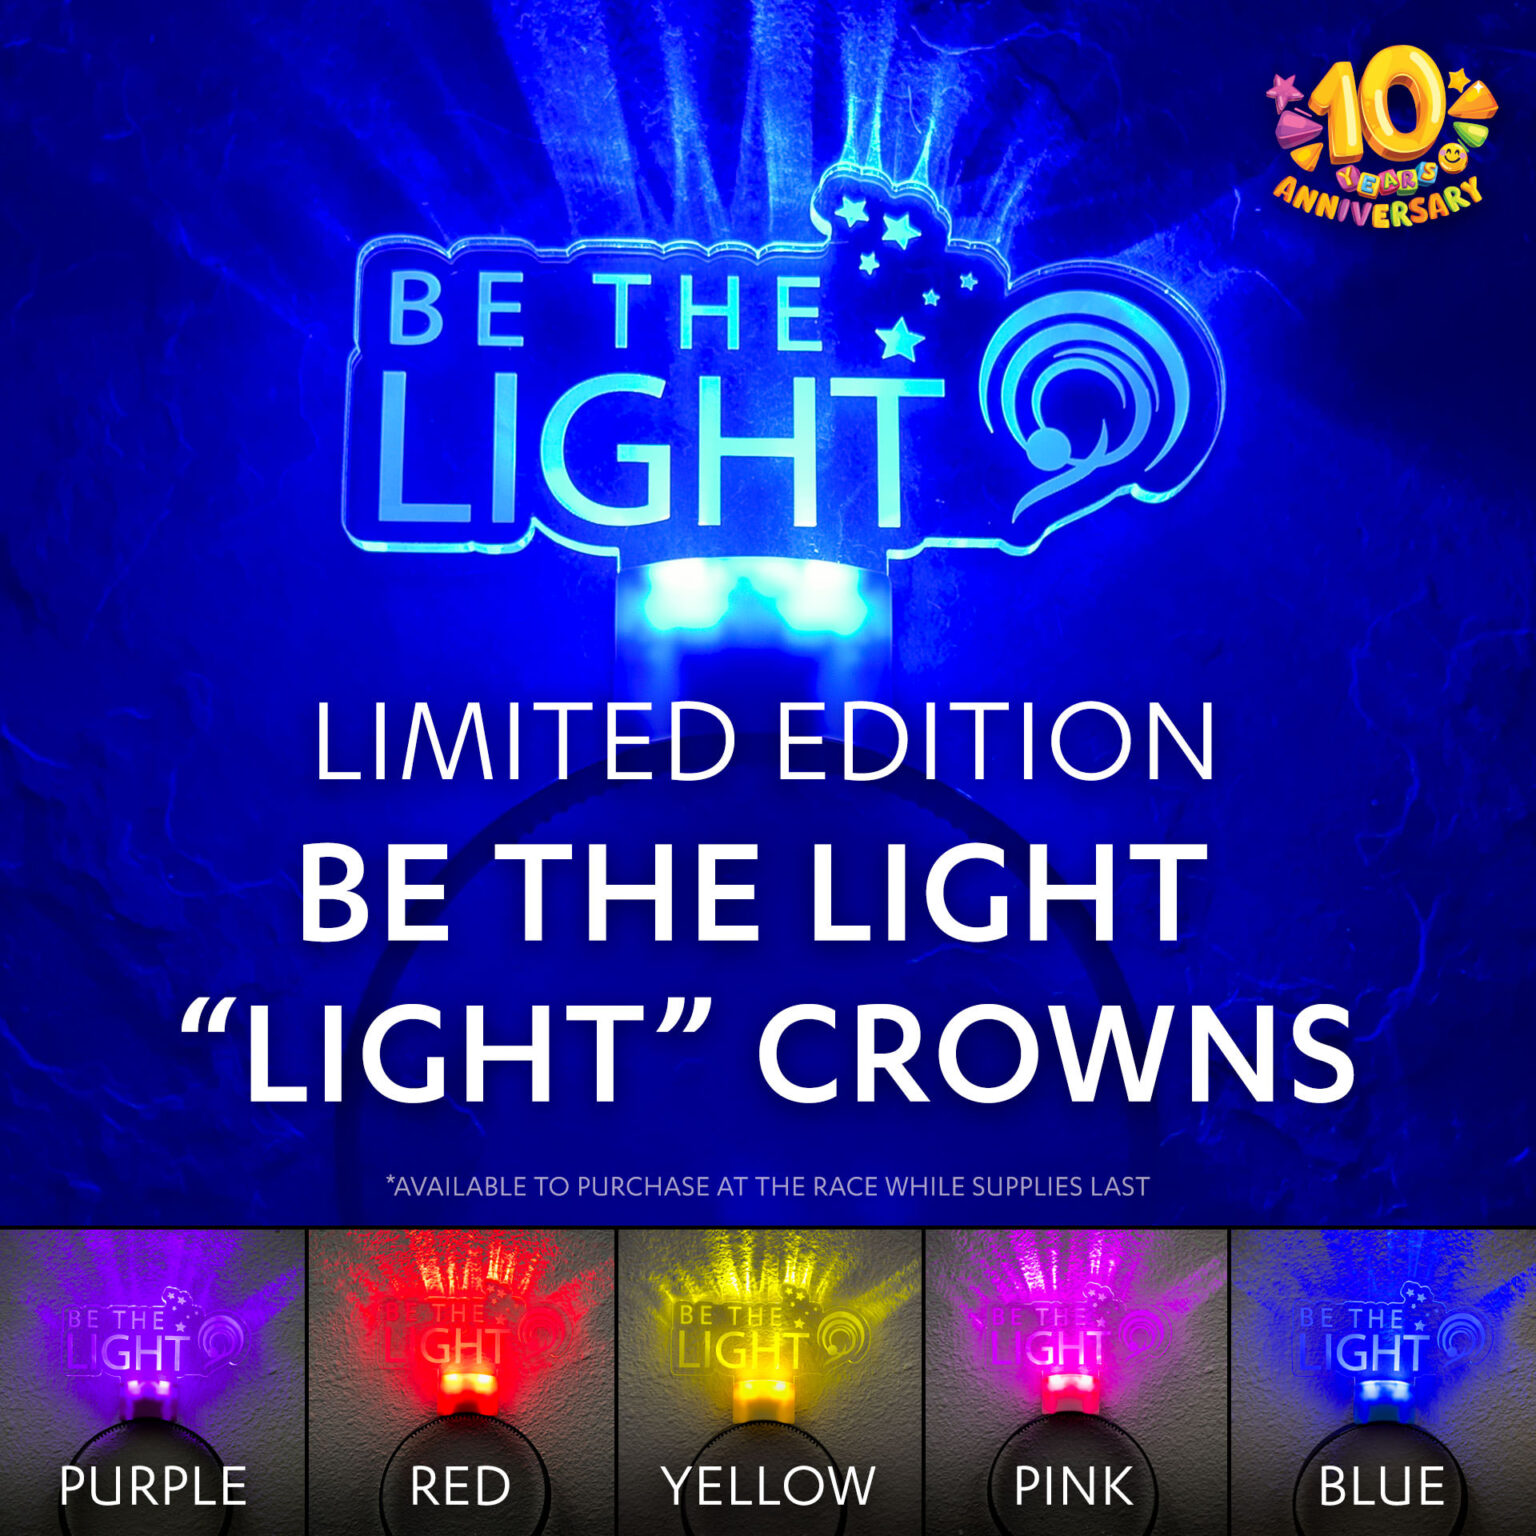 Limited Edition Light Crowns